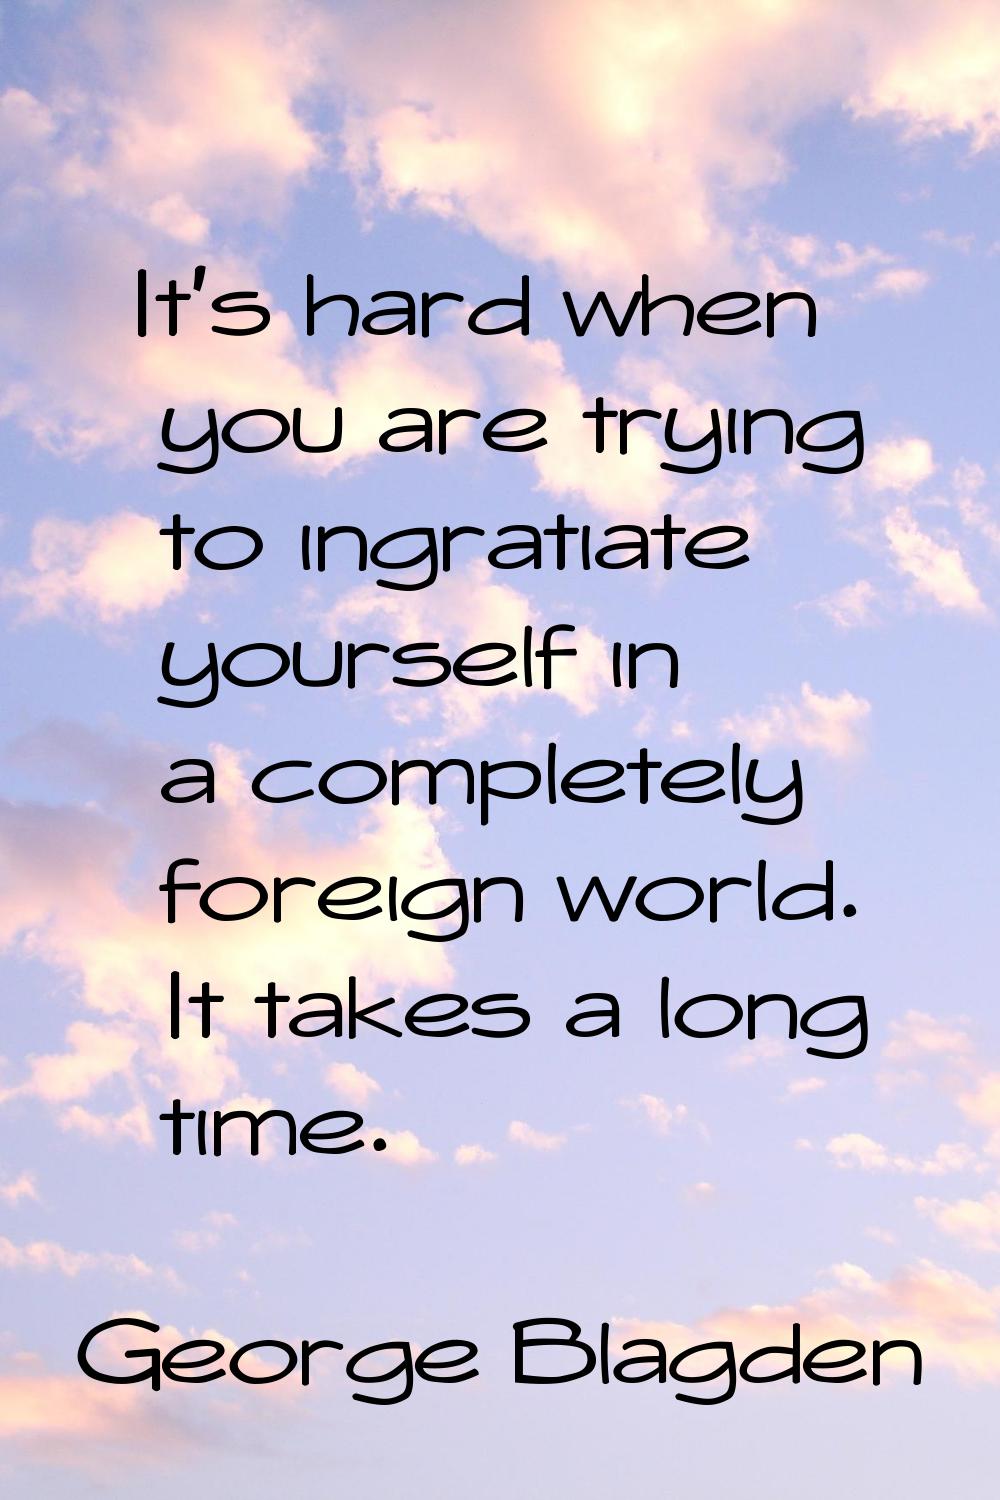 It's hard when you are trying to ingratiate yourself in a completely foreign world. It takes a long